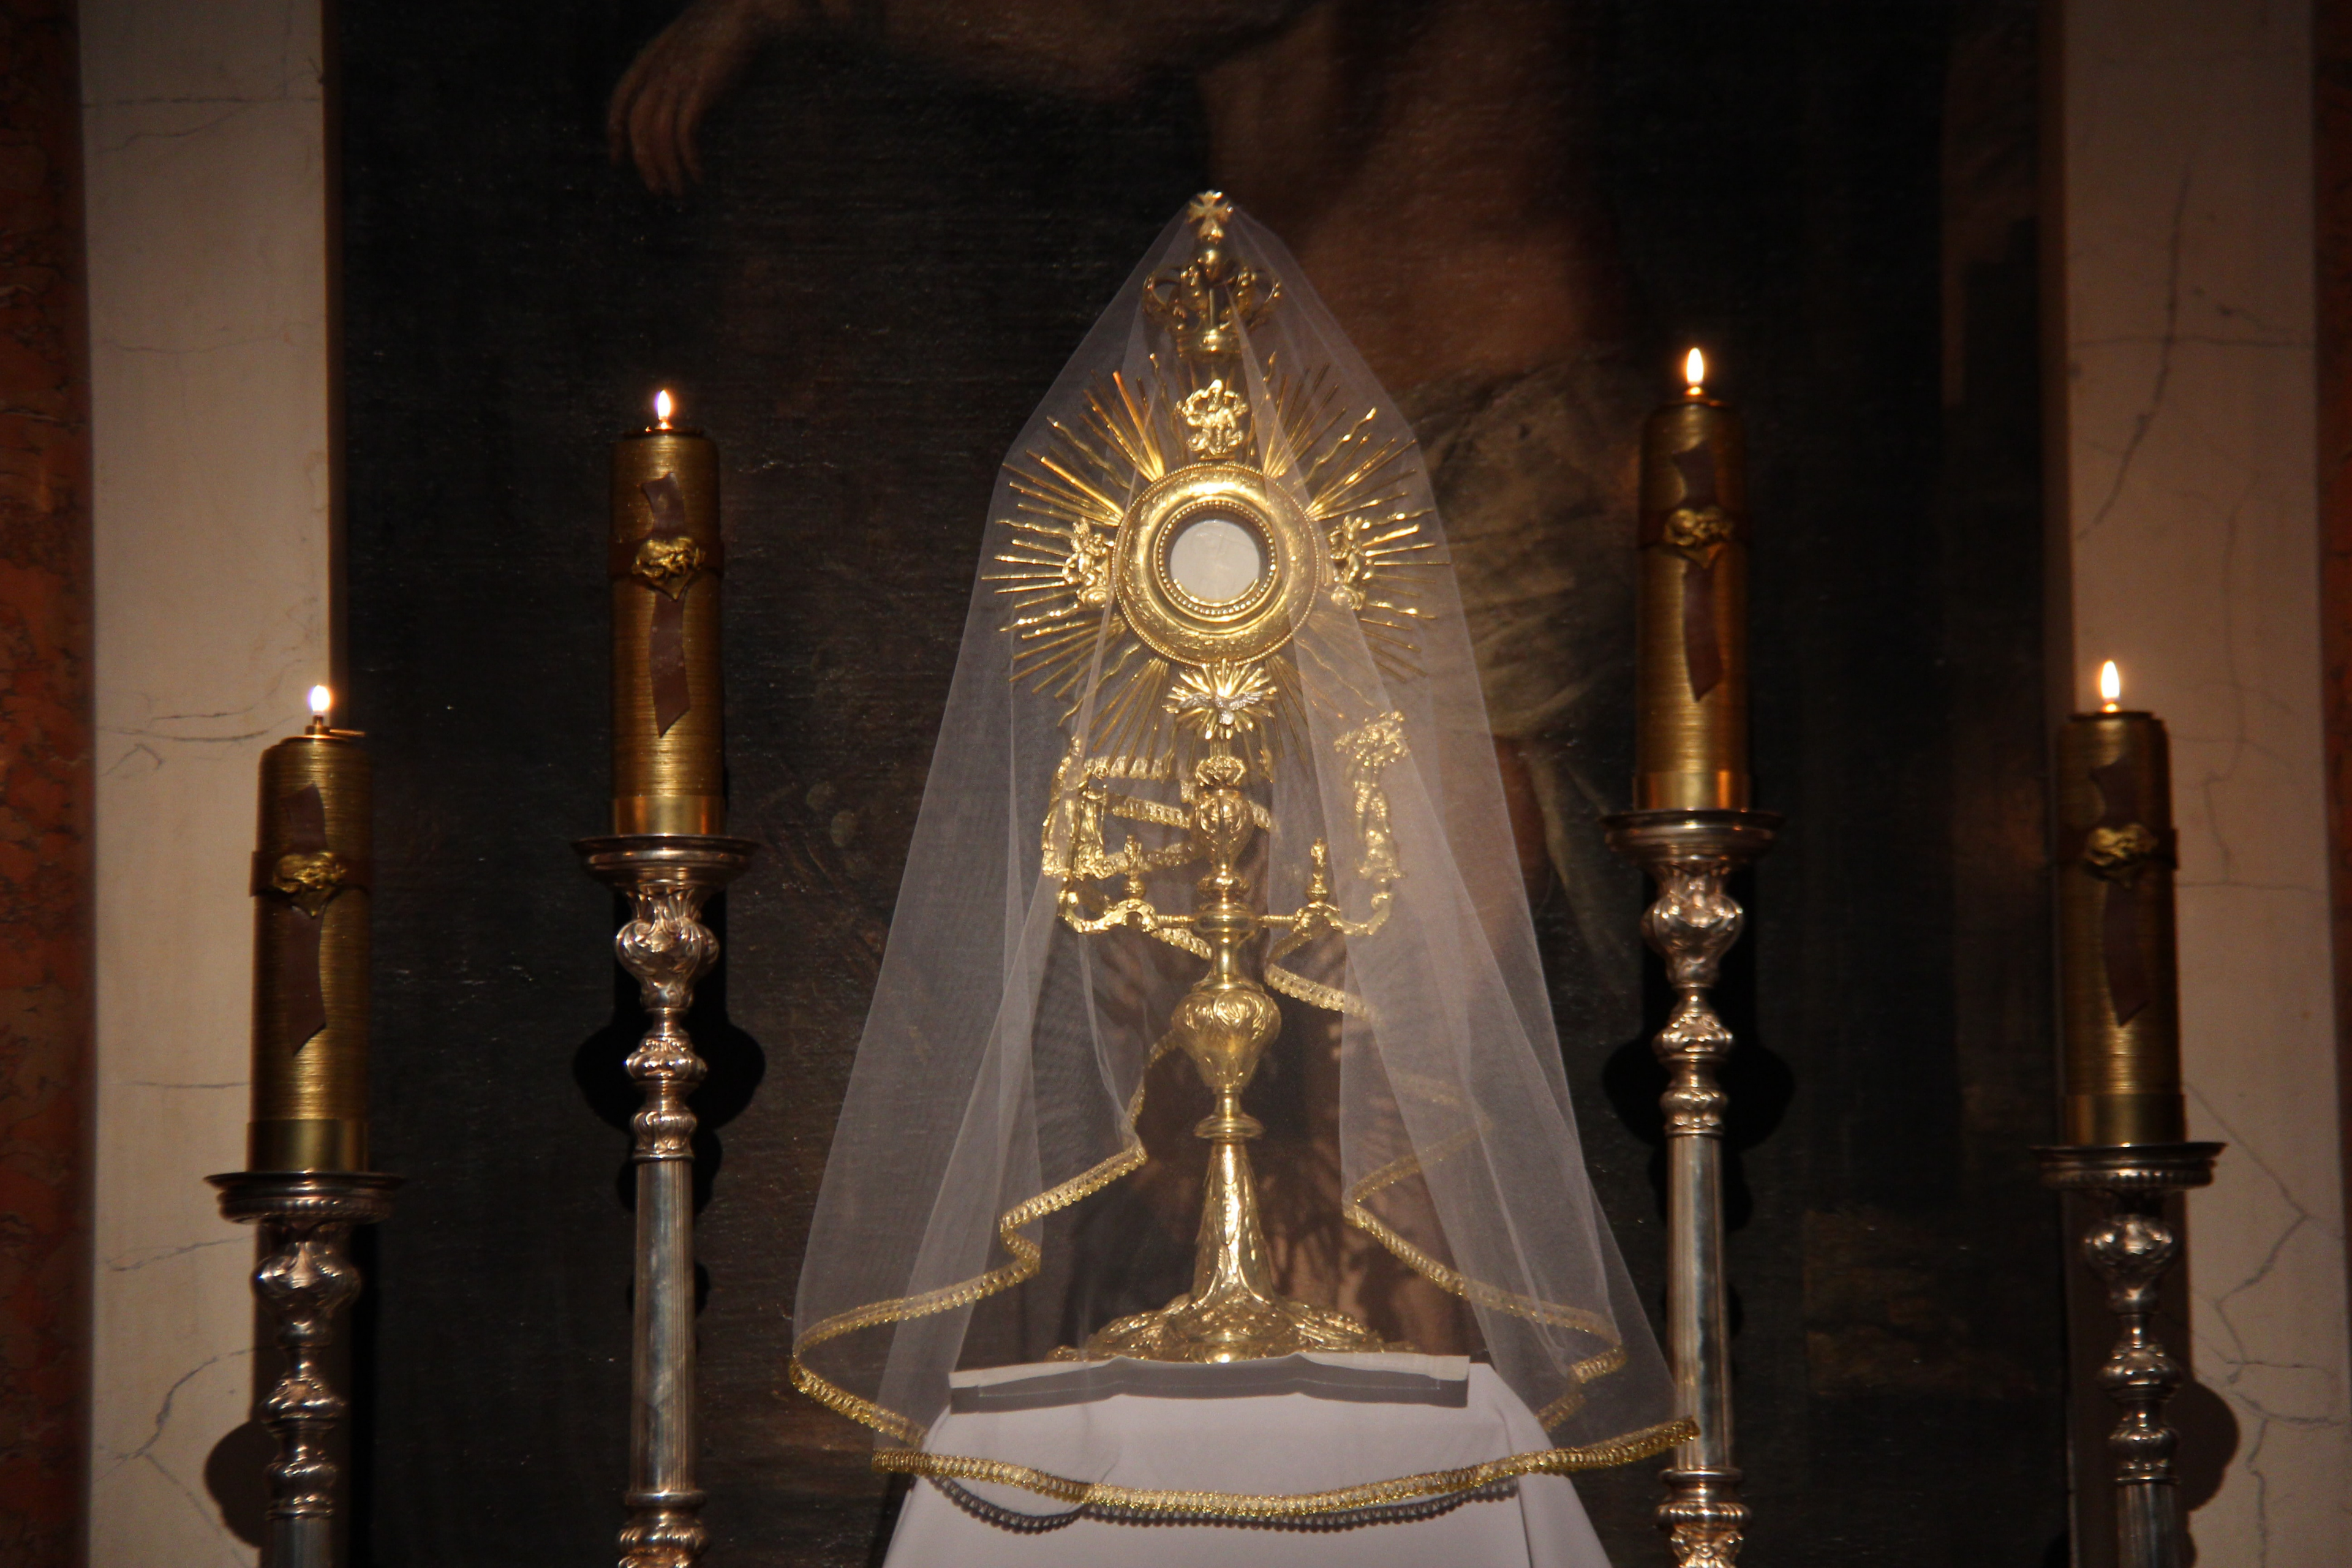 A veiled monstrance with the Blessed Sacrament exposed.